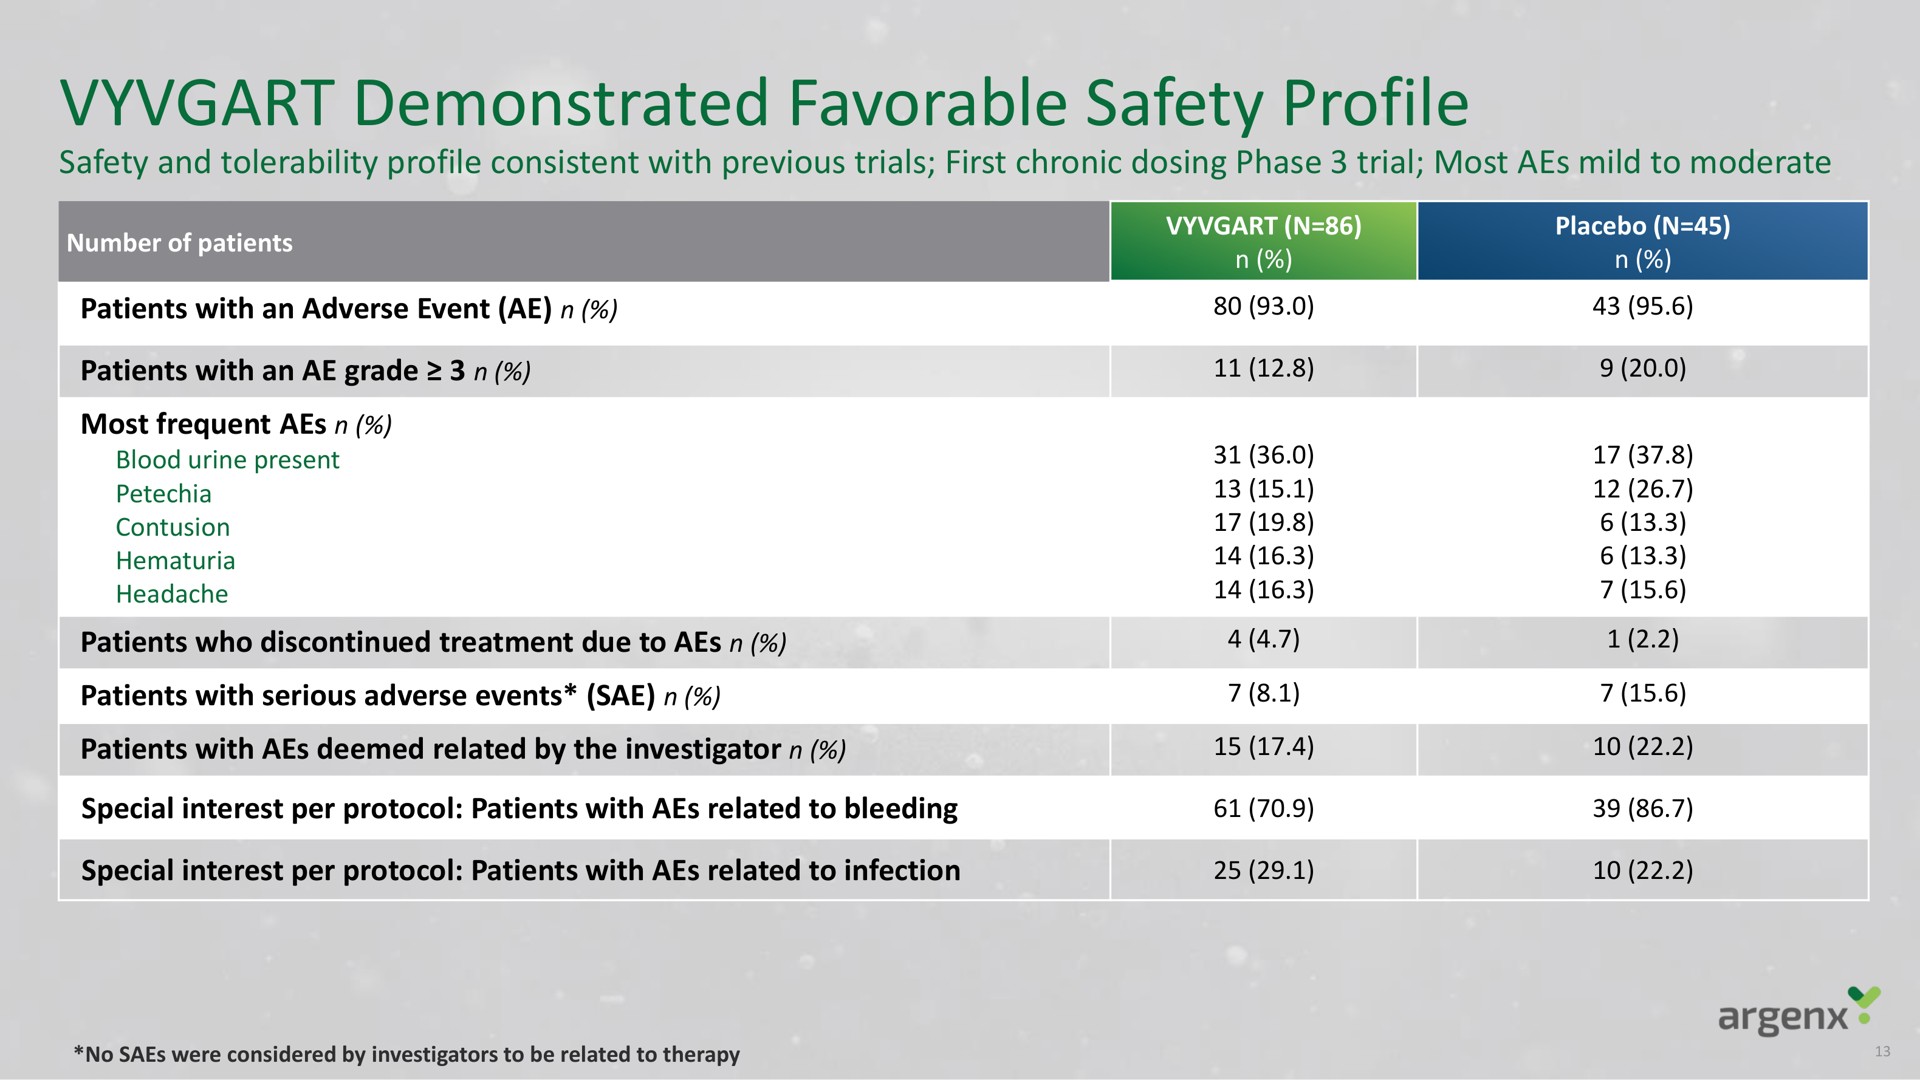 demonstrated favorable safety profile | argenx SE